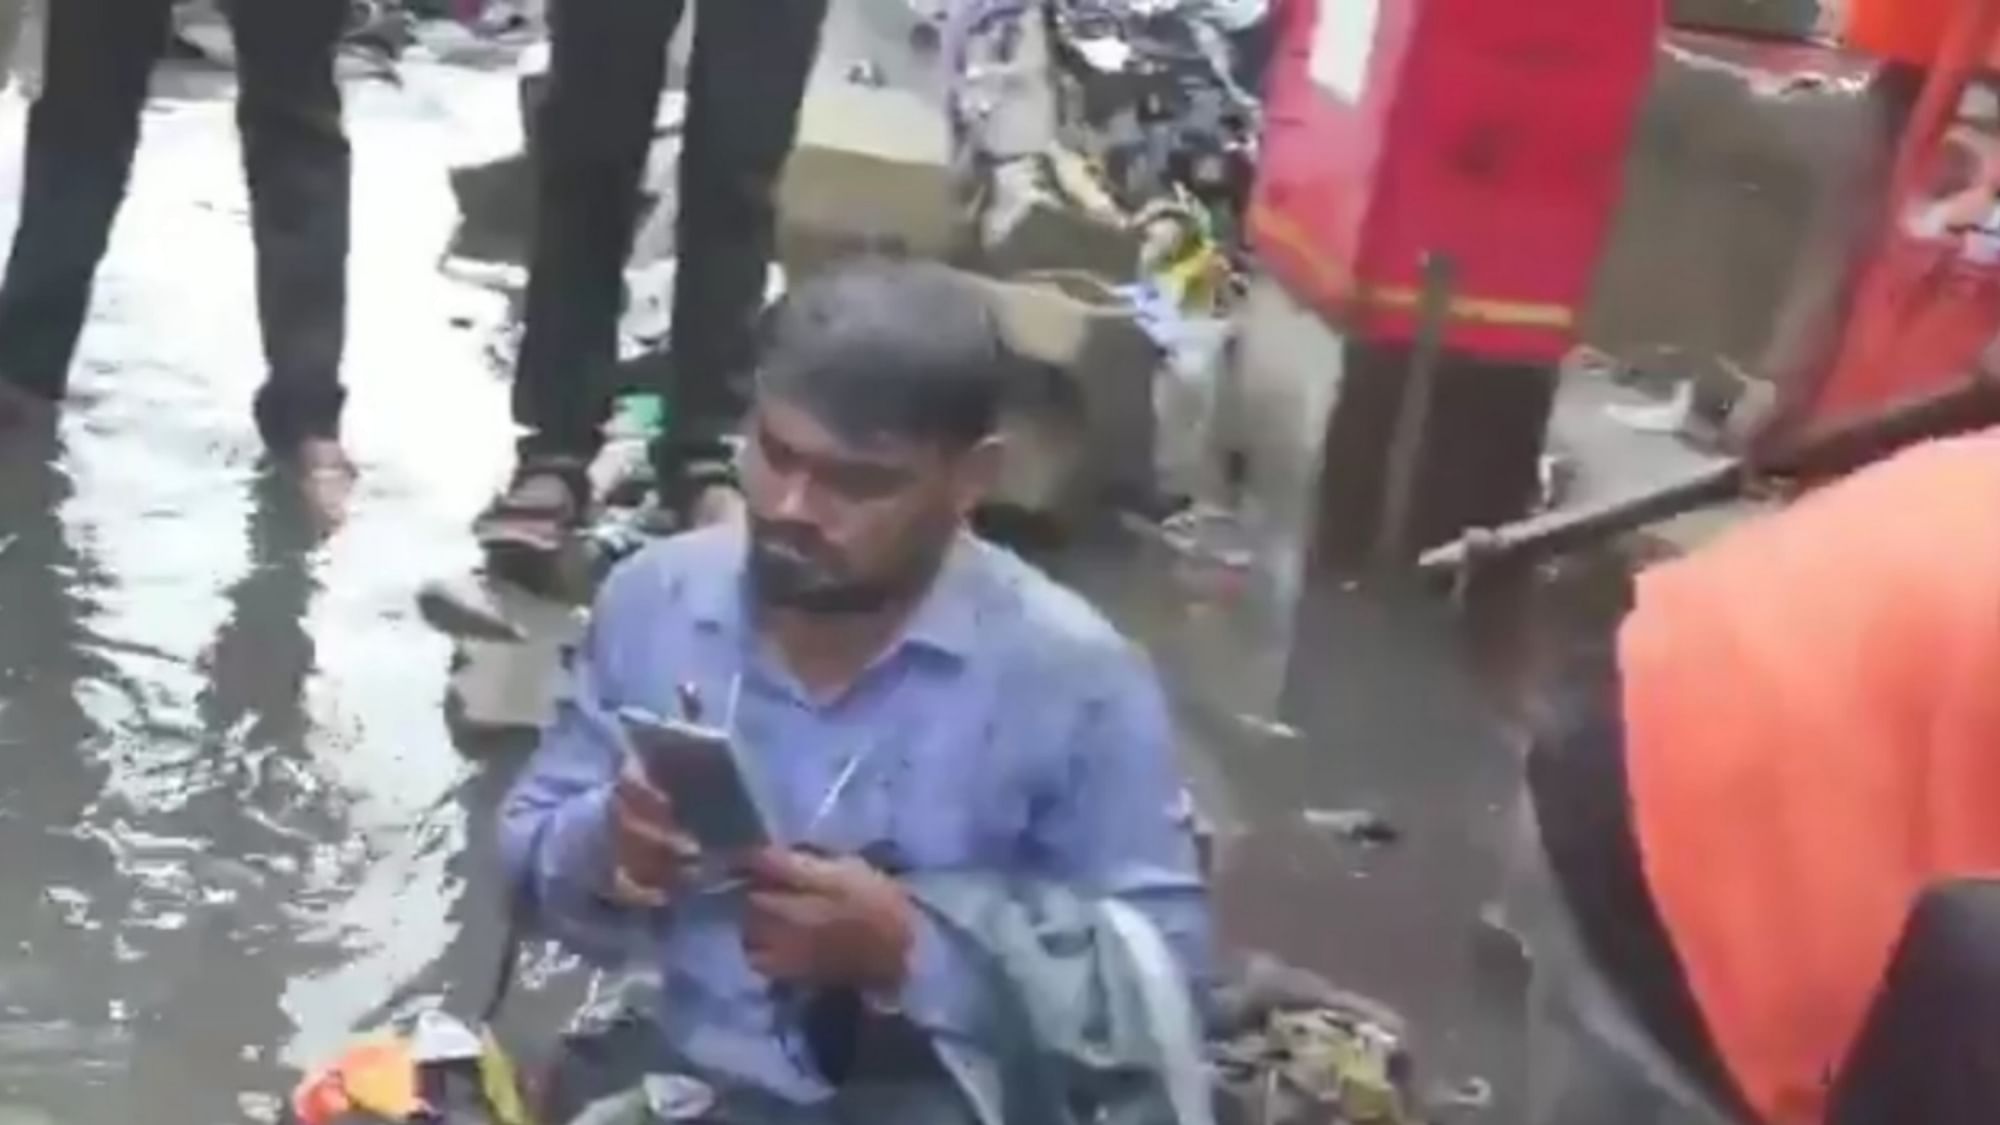 Shiv Sena MLA Dilip Lande on Saturday, forced a BMC contractor to sit on a waterlogged road in Mumbai and asked people to dump garbage on him for not getting drains cleaned properly.